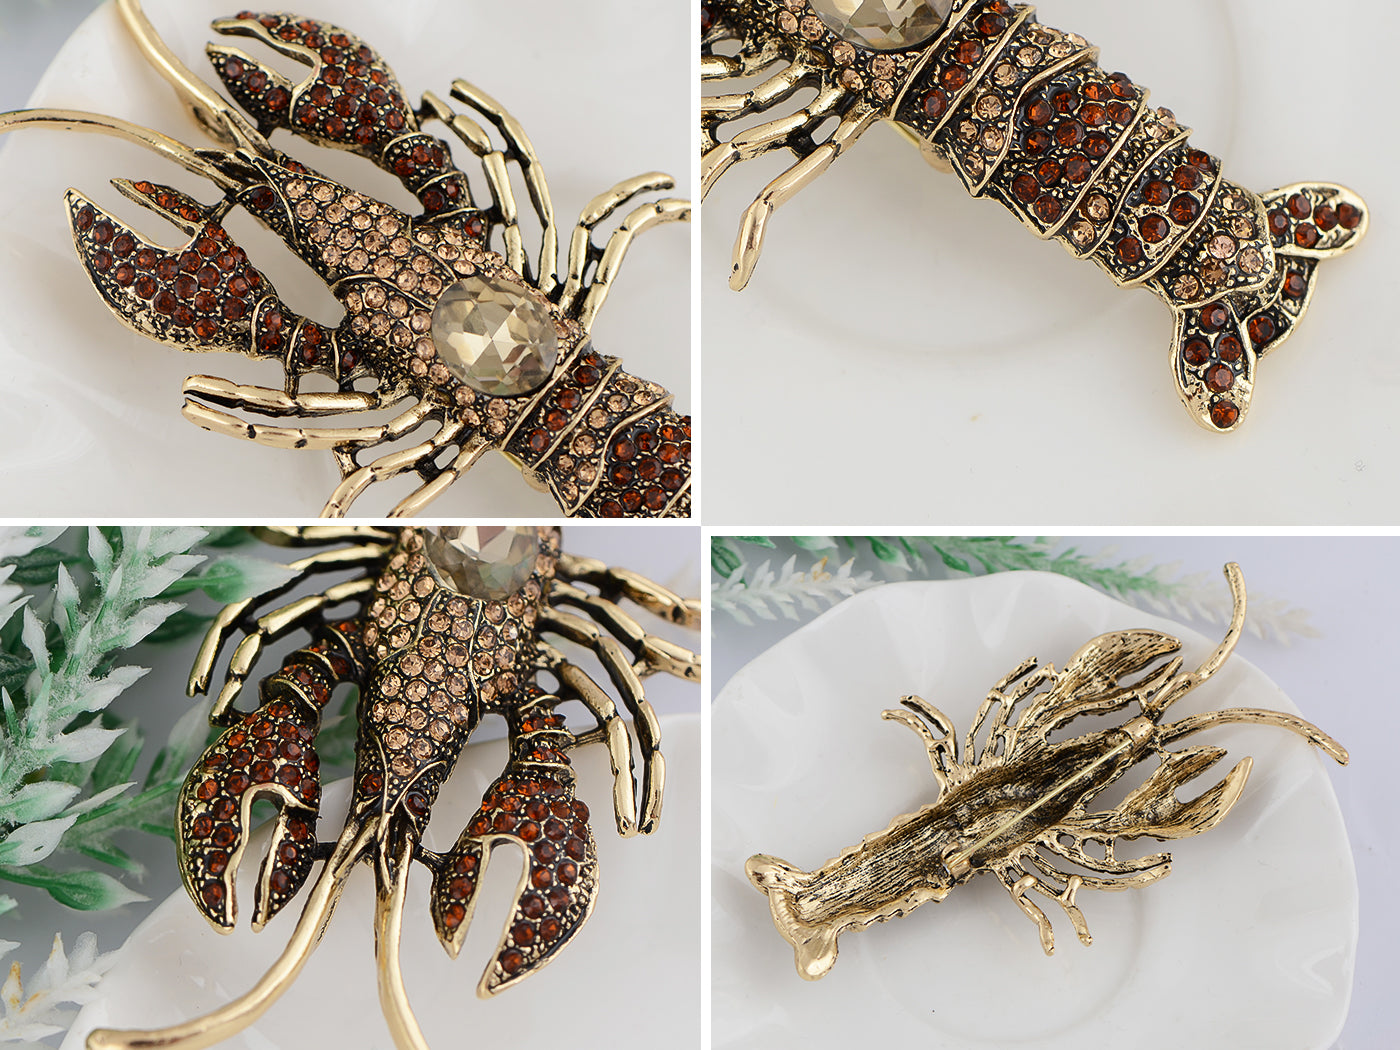 Nautical Ocean Animal Lobster Crawfish With Movable Tail Novelty Sea Fish Novelty Brooch Pin